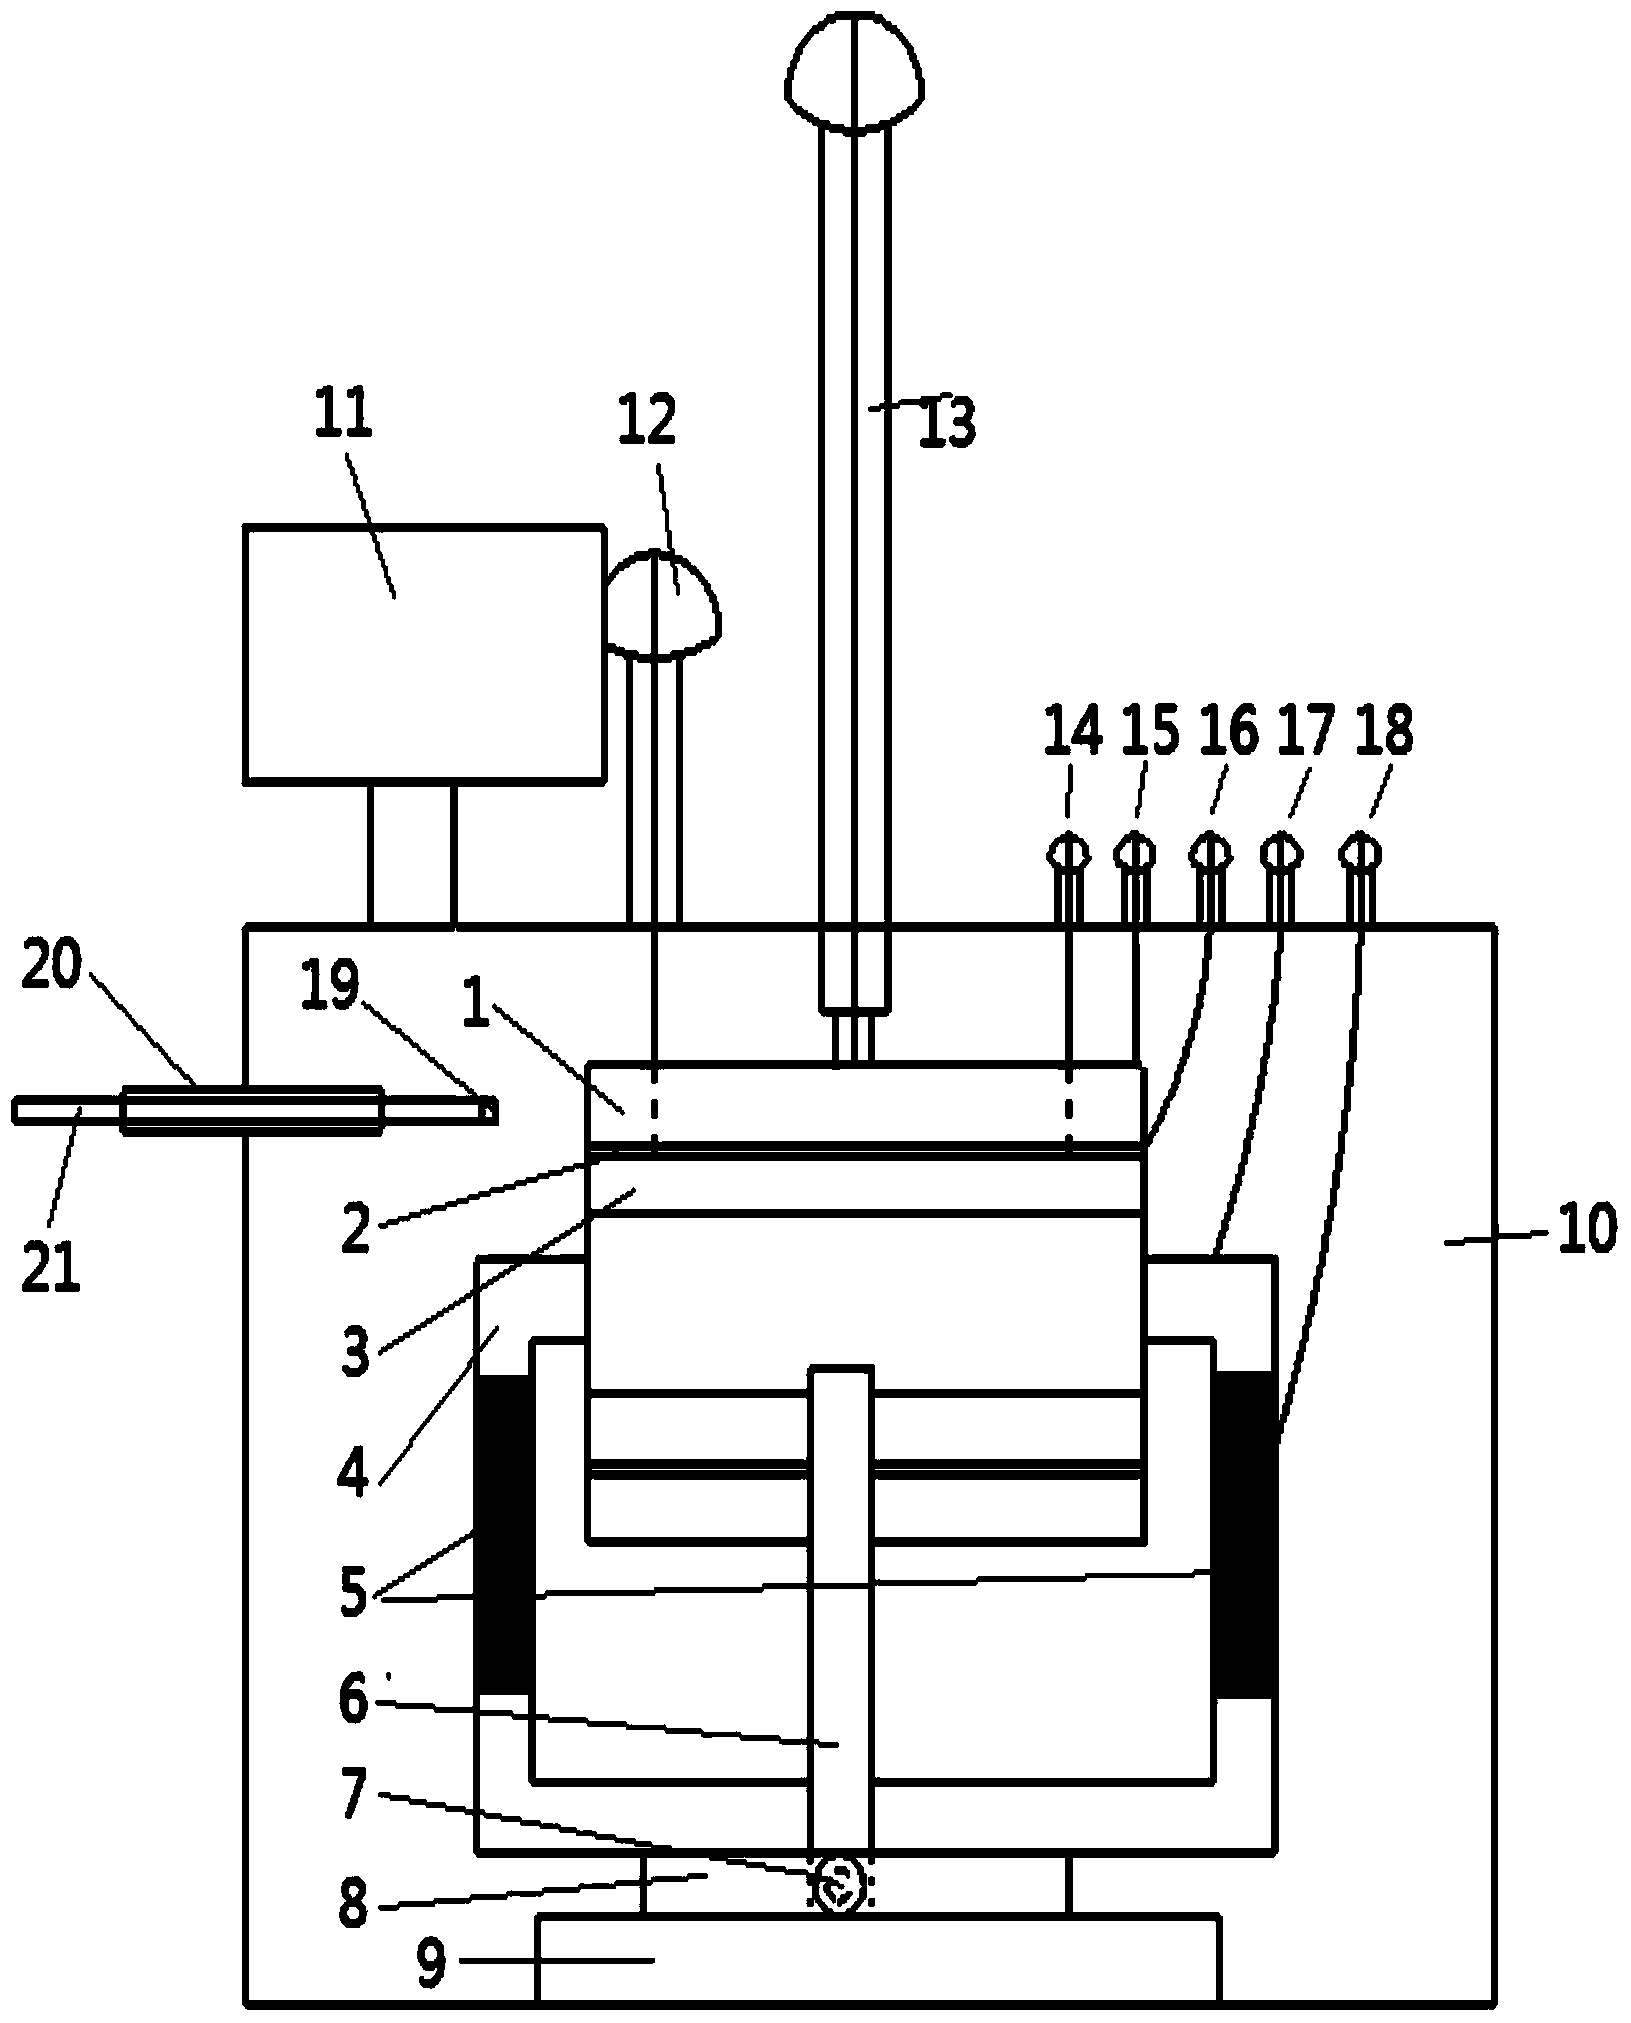 Method for simulating faults of power transformer